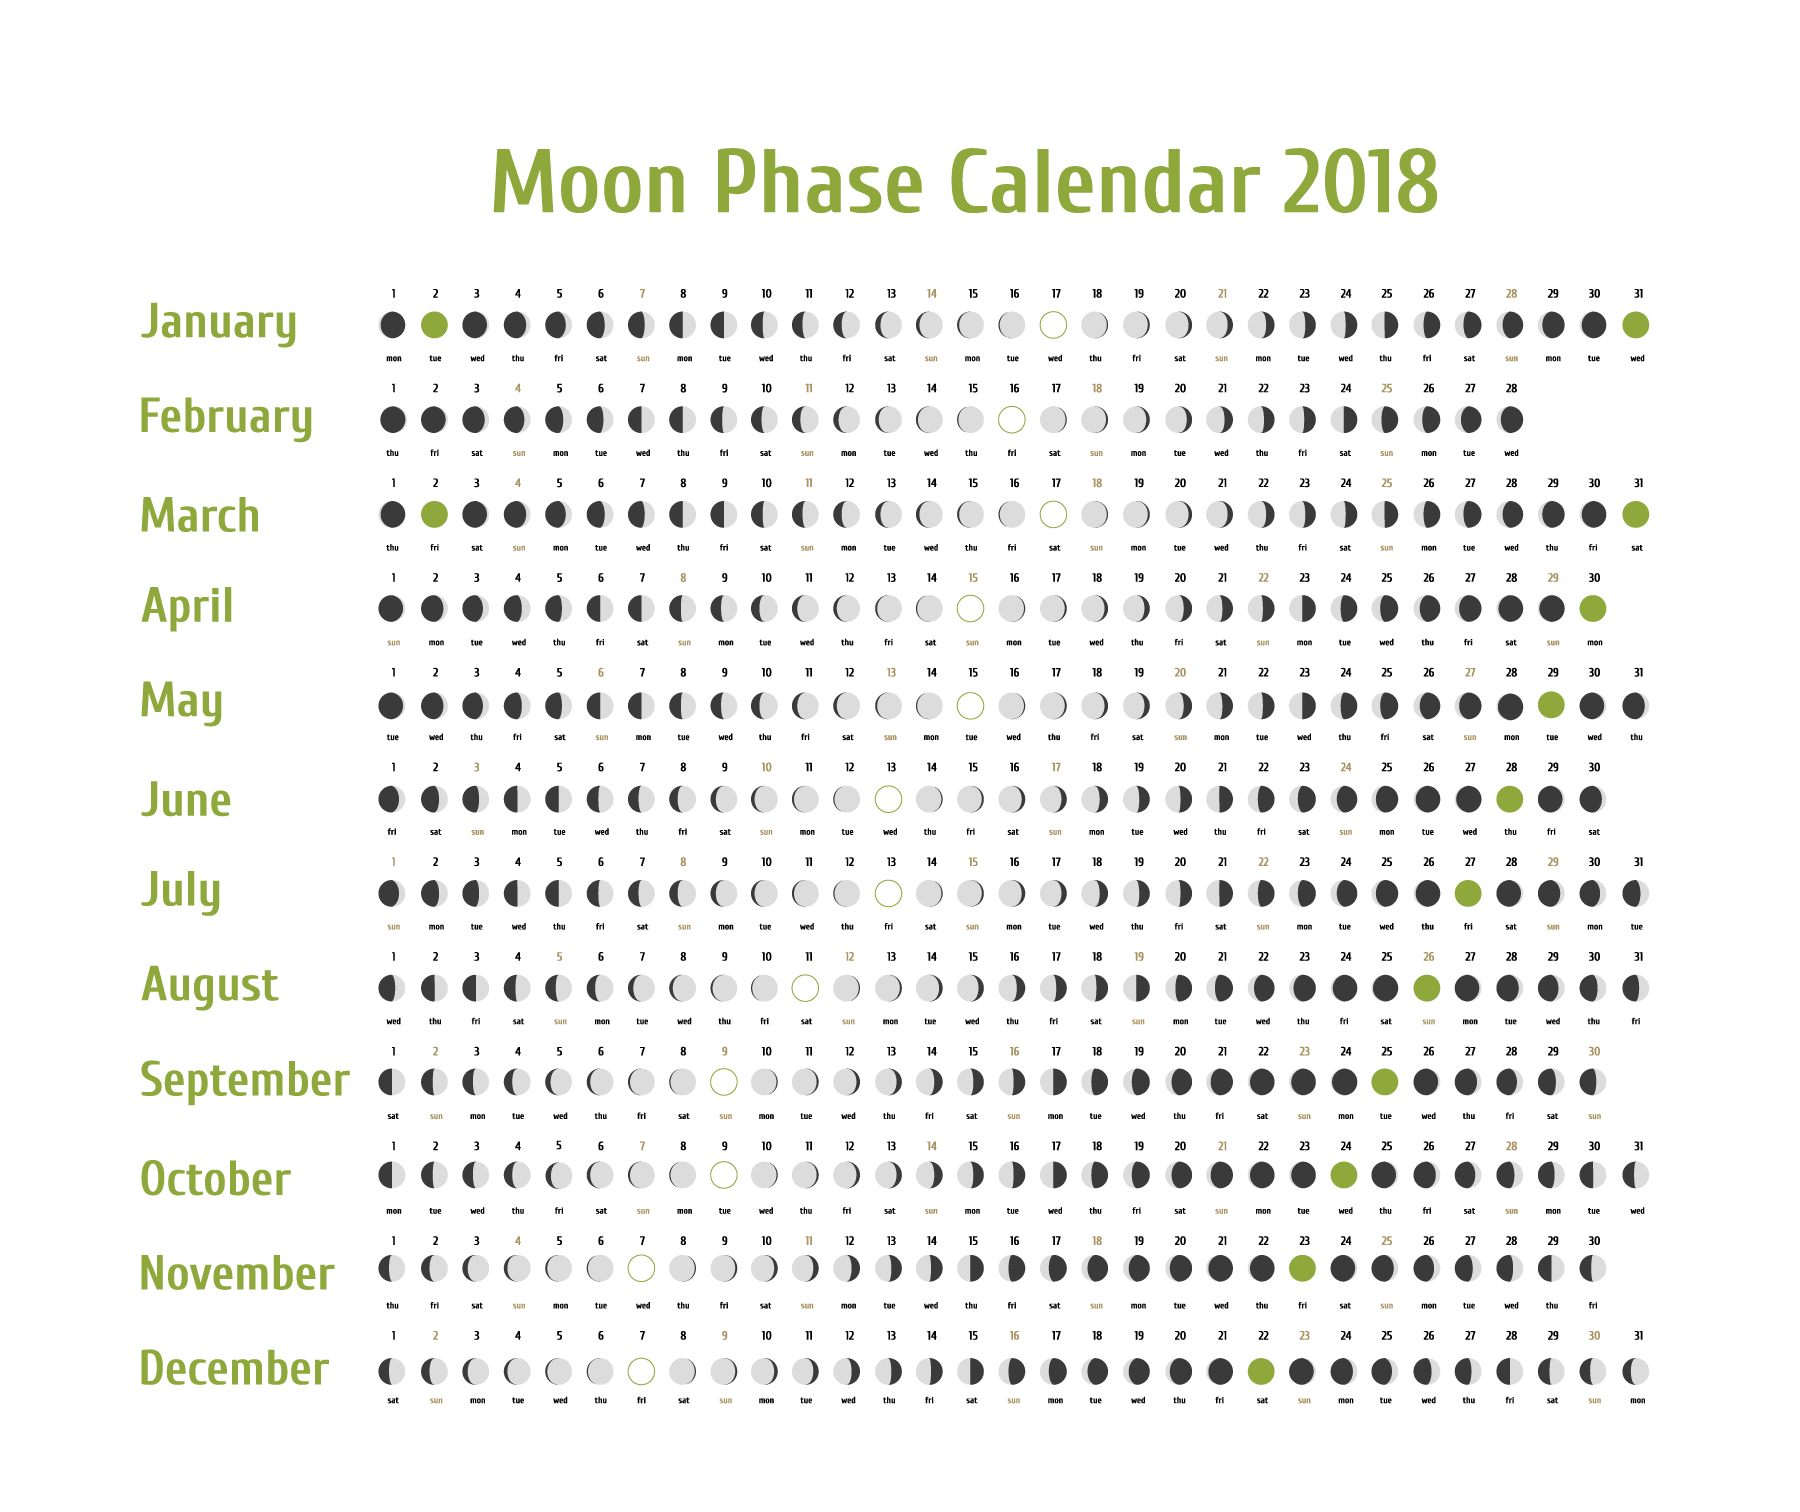 Moon.phase Calendar Customize and Print